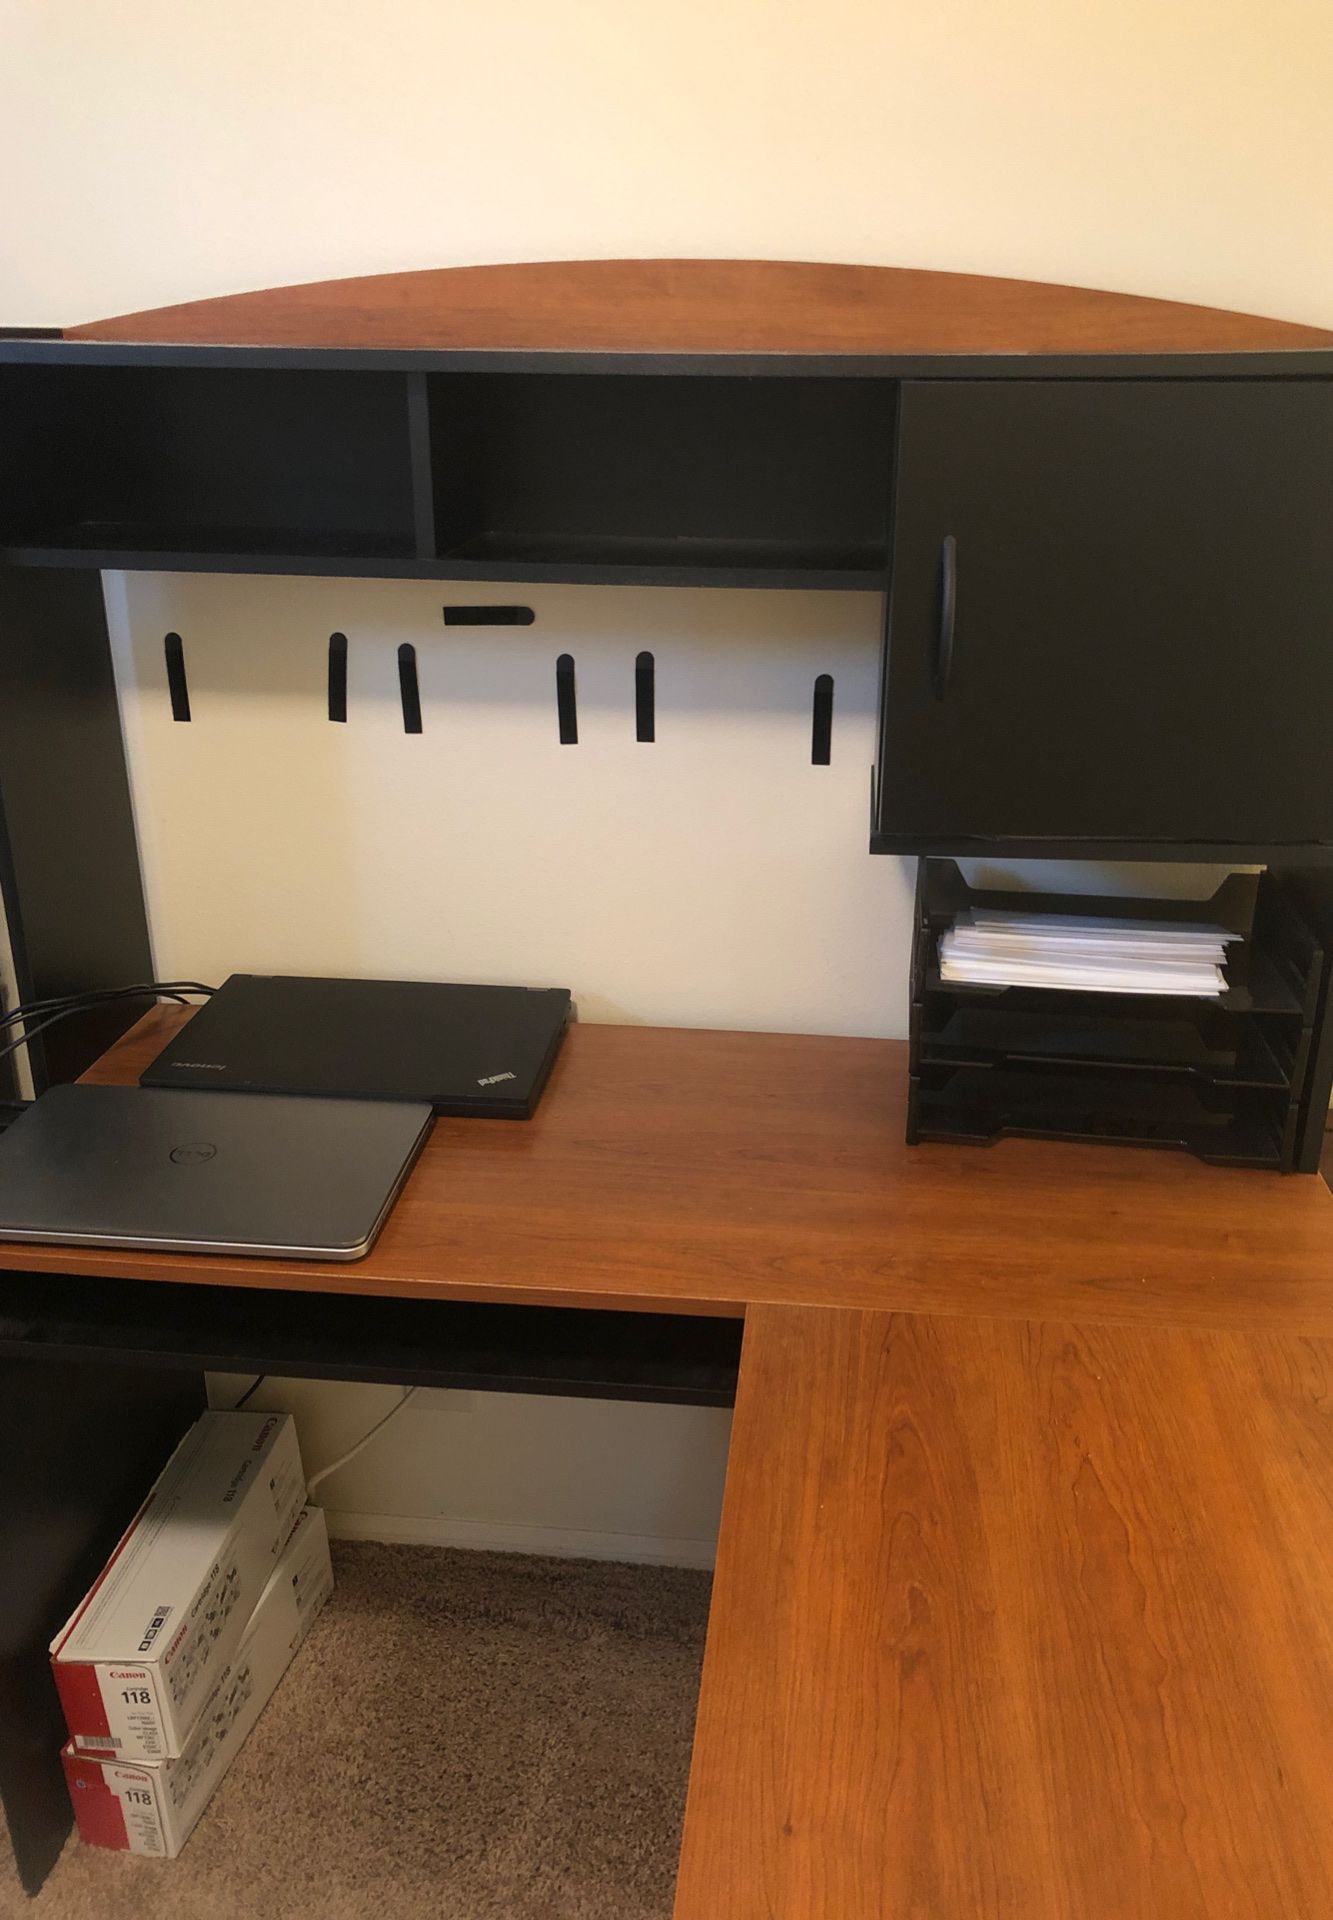 Desk with hutch, one piece, black and wood